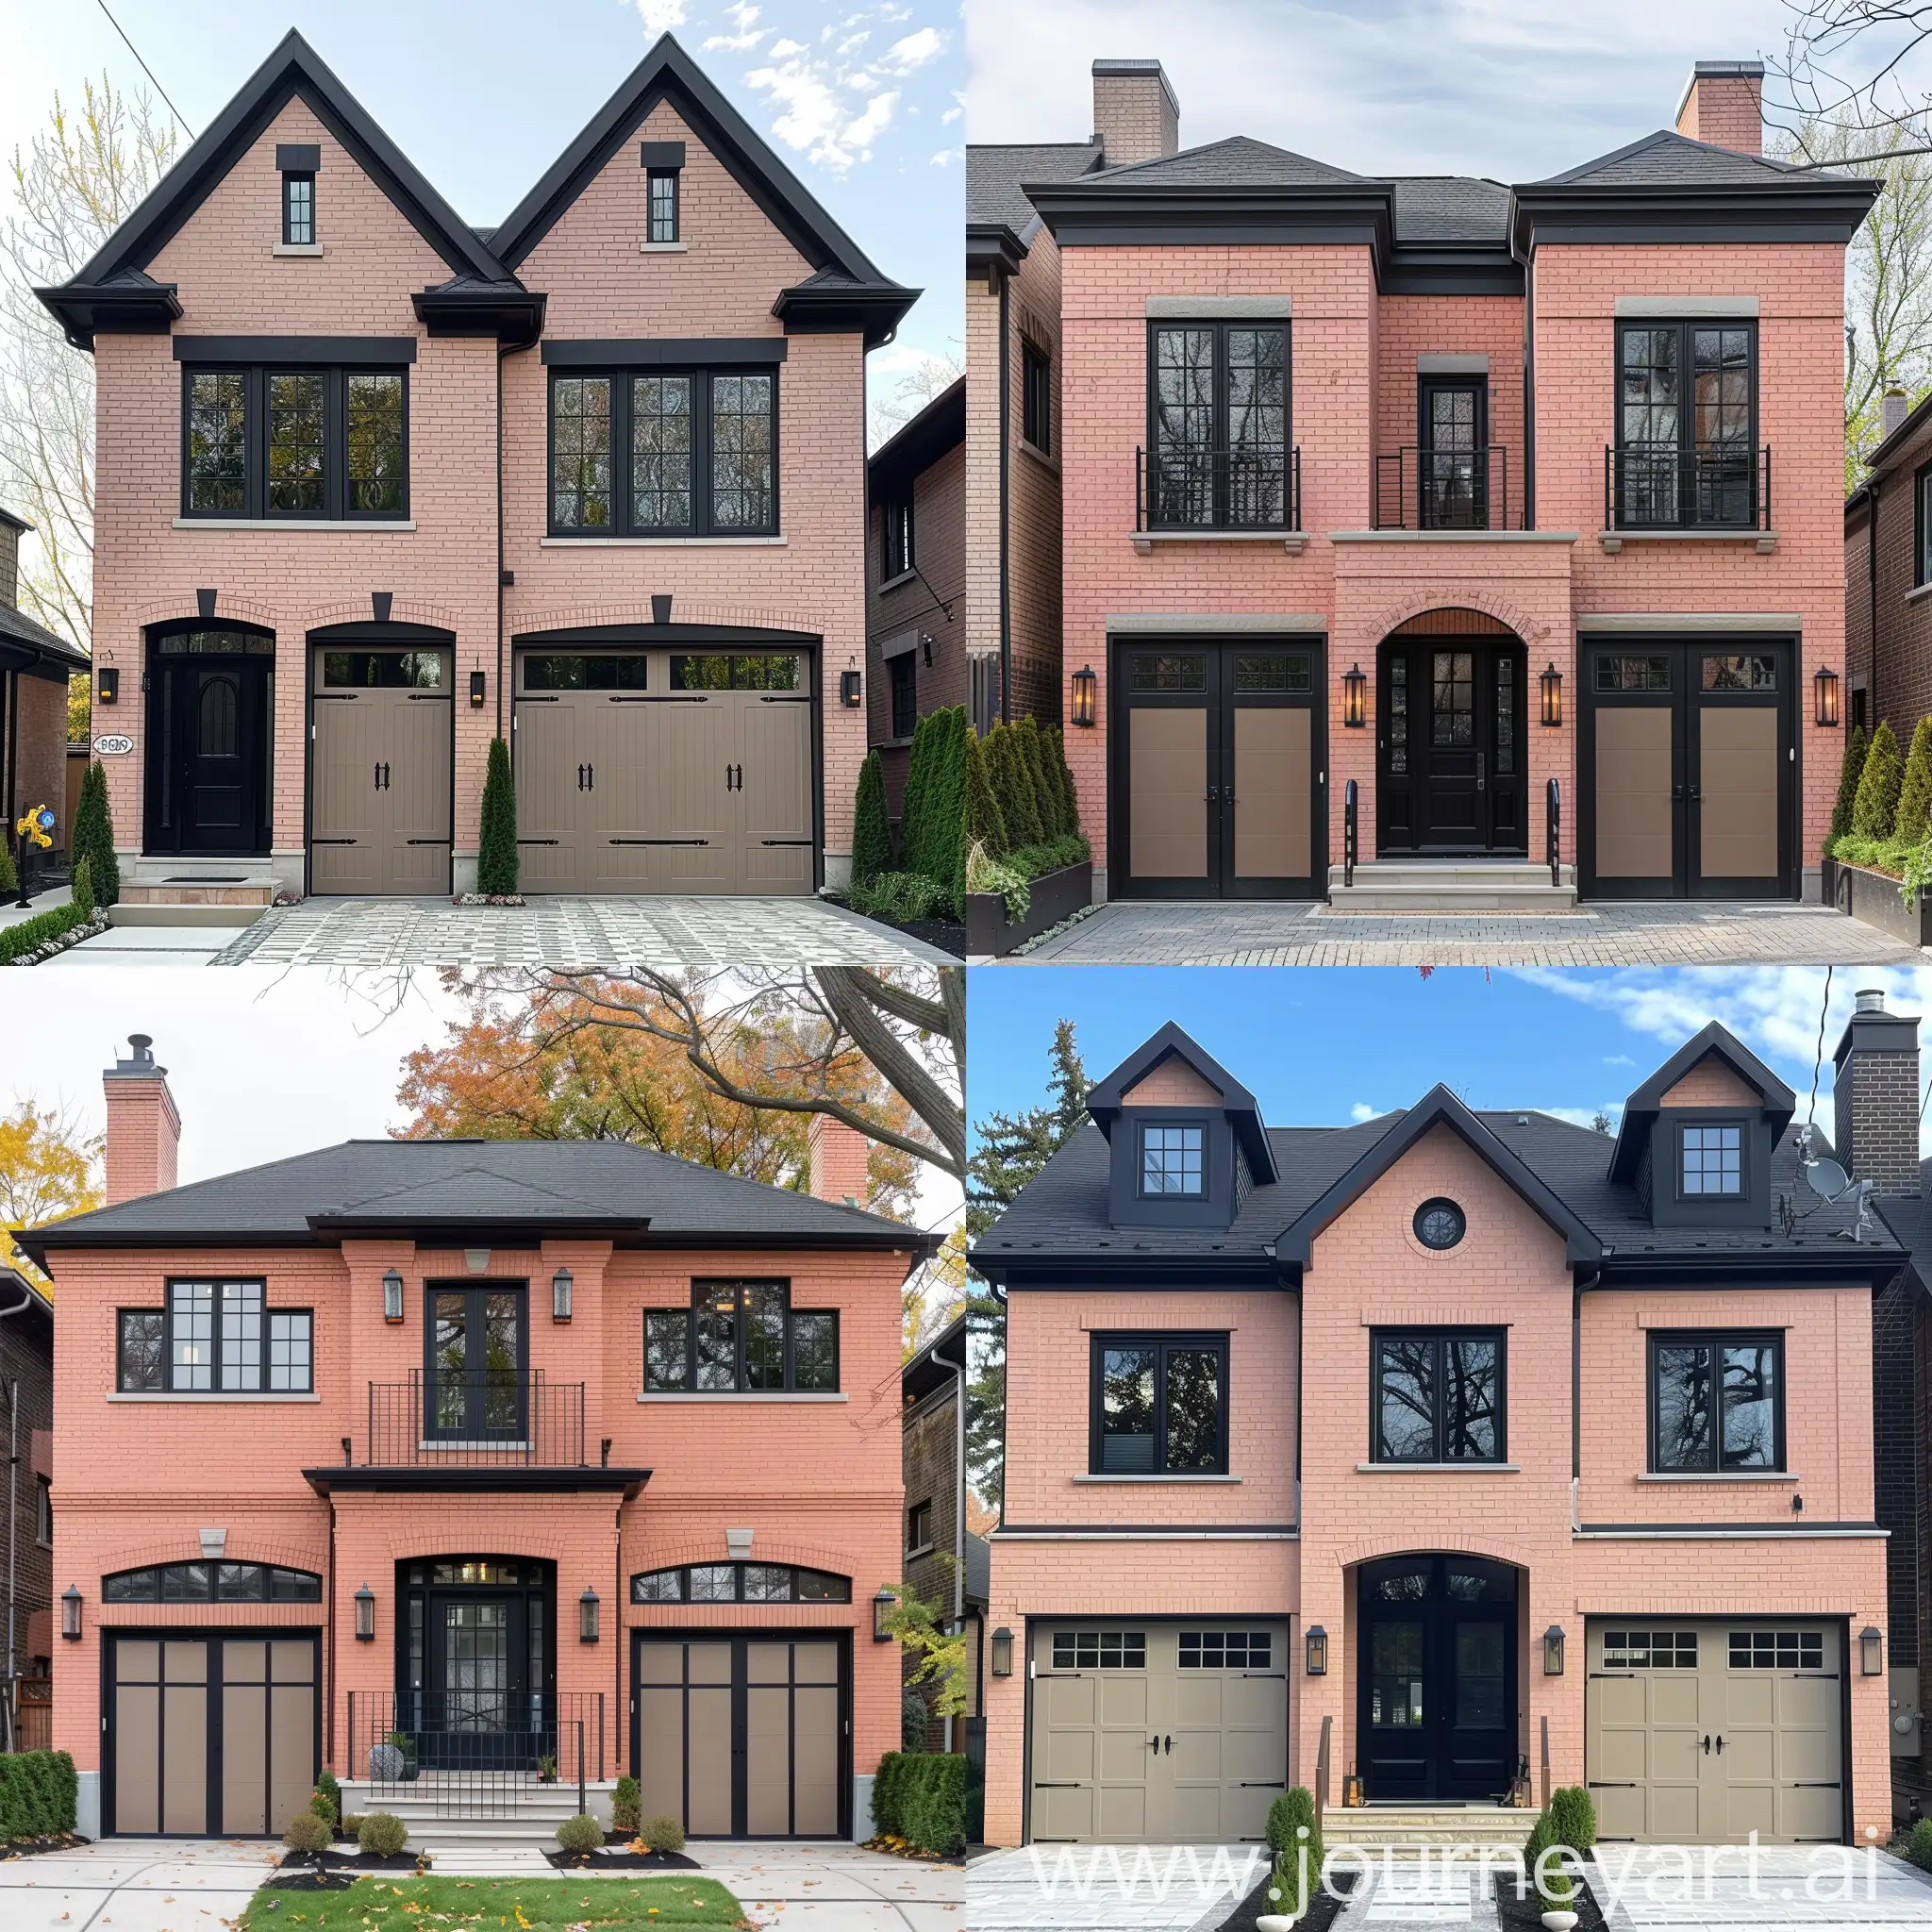 Show me a two storey residential home with salmon pink brick, black windows, black doors, and a taupe colored double door garage